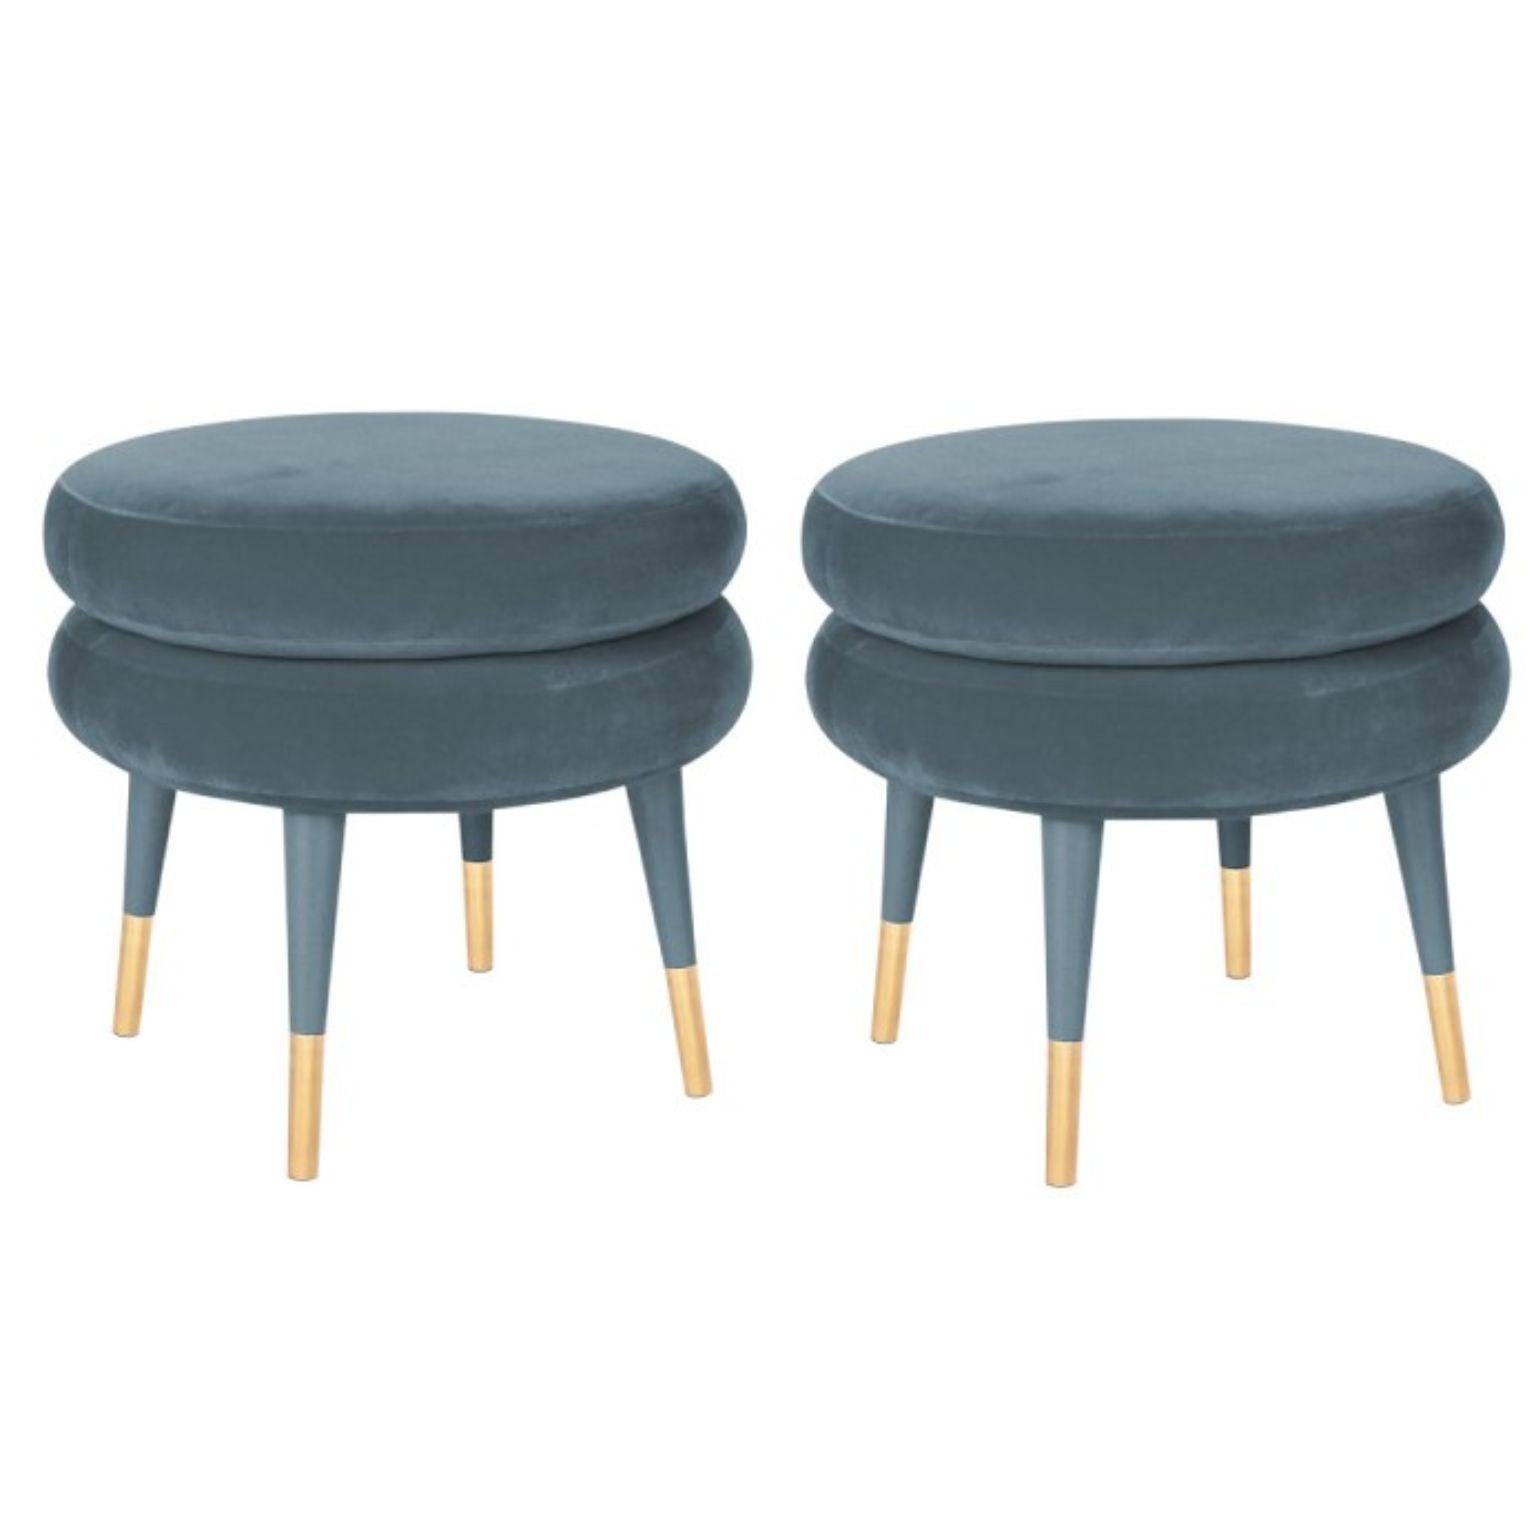 Set of 2 marshmallow stools, Royal Stranger
Dimensions: 45 x 50 x 50 cm.
Materials: Velvet upholstery, brass.
Available in: Mint green, light pink, royal green, royal red.

Royal Stranger is an exclusive furniture brand determined to bring you